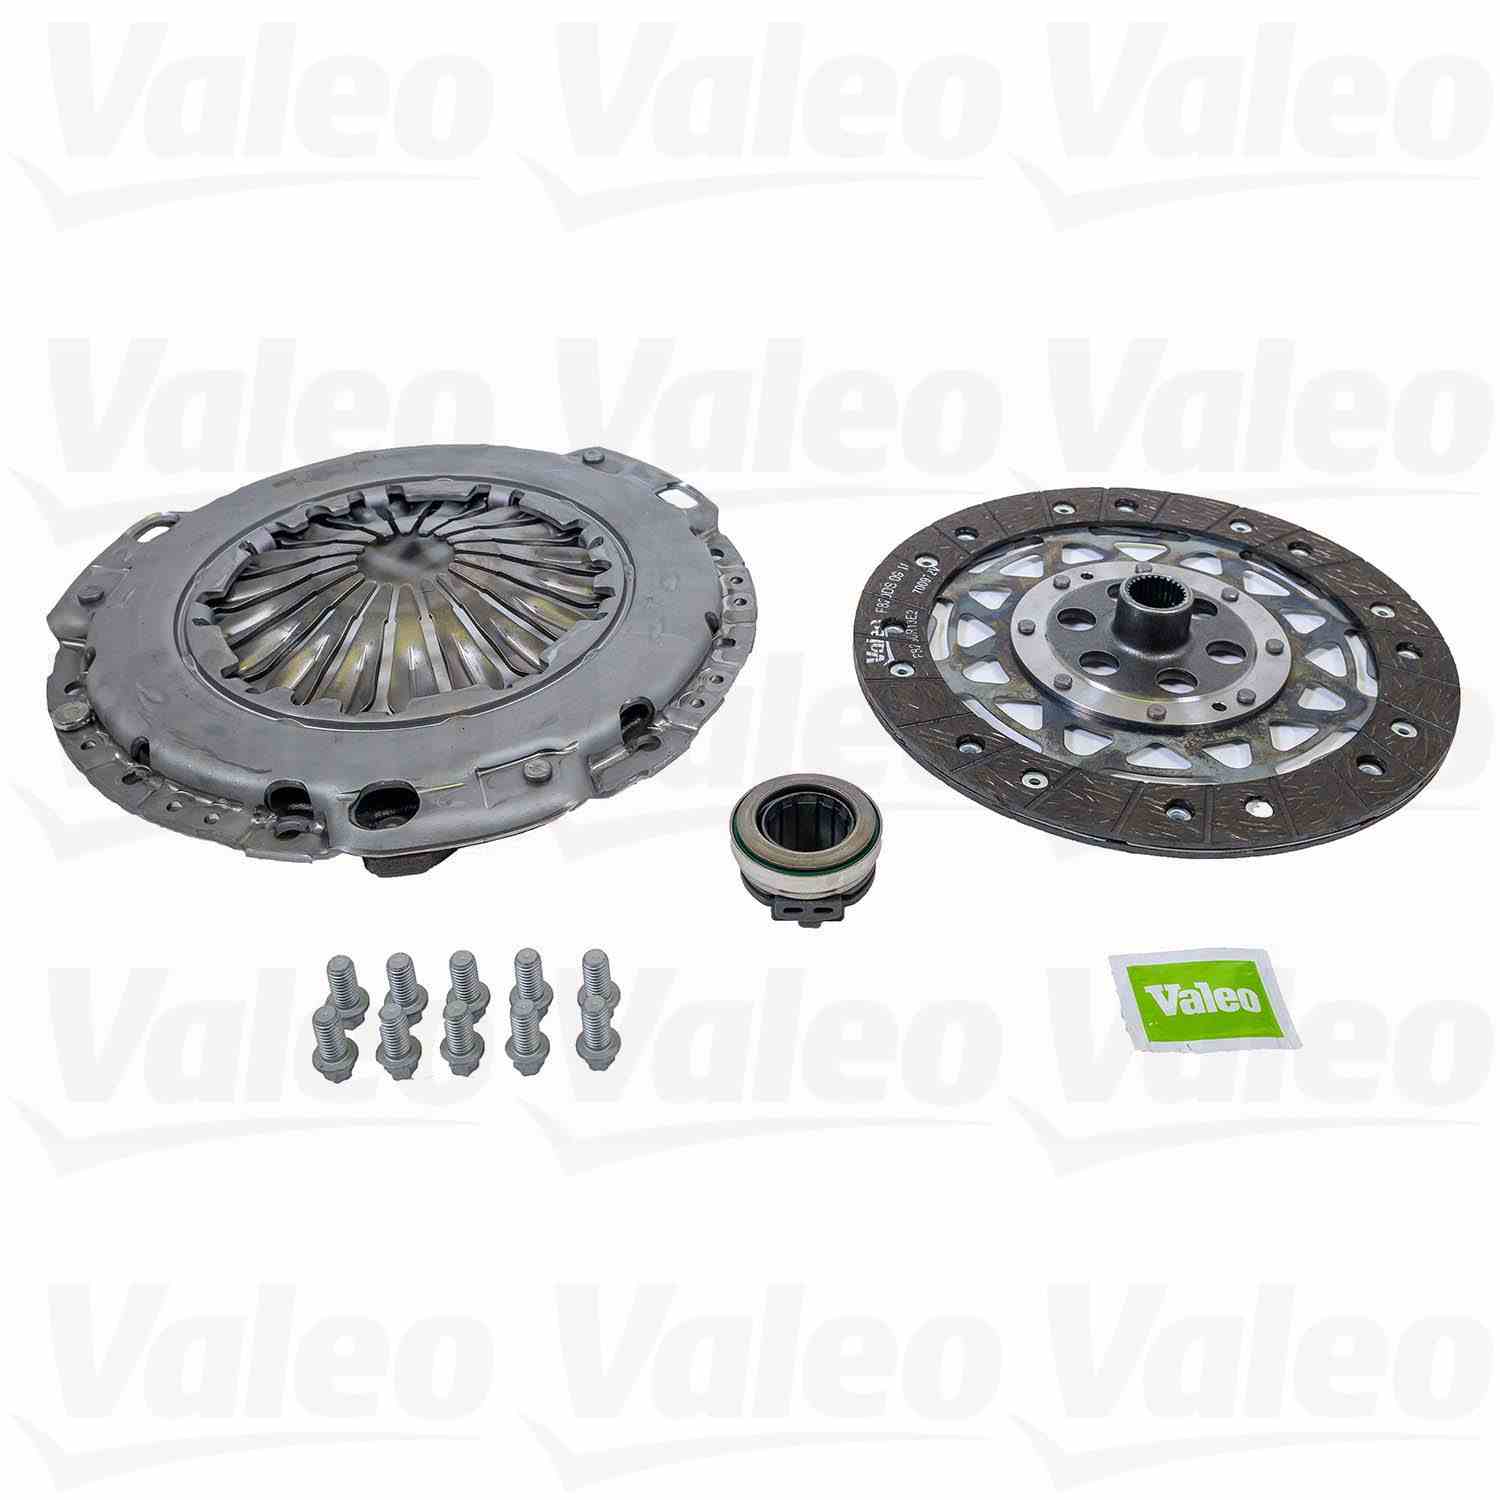 Front View of Transmission Clutch Kit VALEO 832228